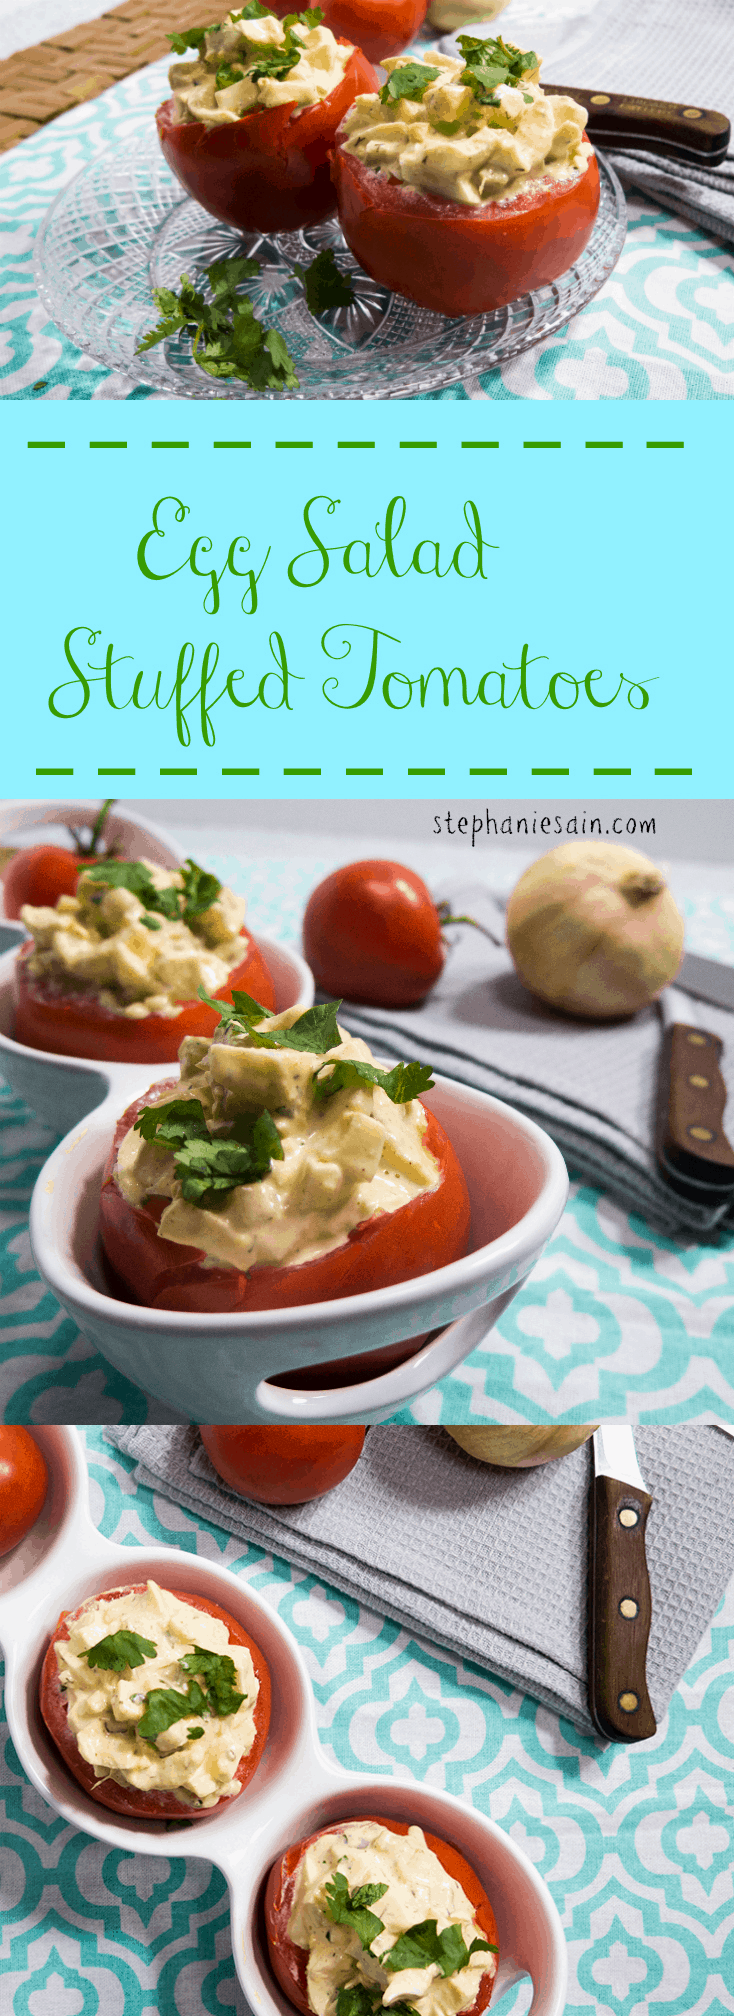 Egg Salad Stuffed Tomatoes make the perfect light lunch or dinner. It's a healthy quick meal that's low in carbs, vegetarian, and gluten free.